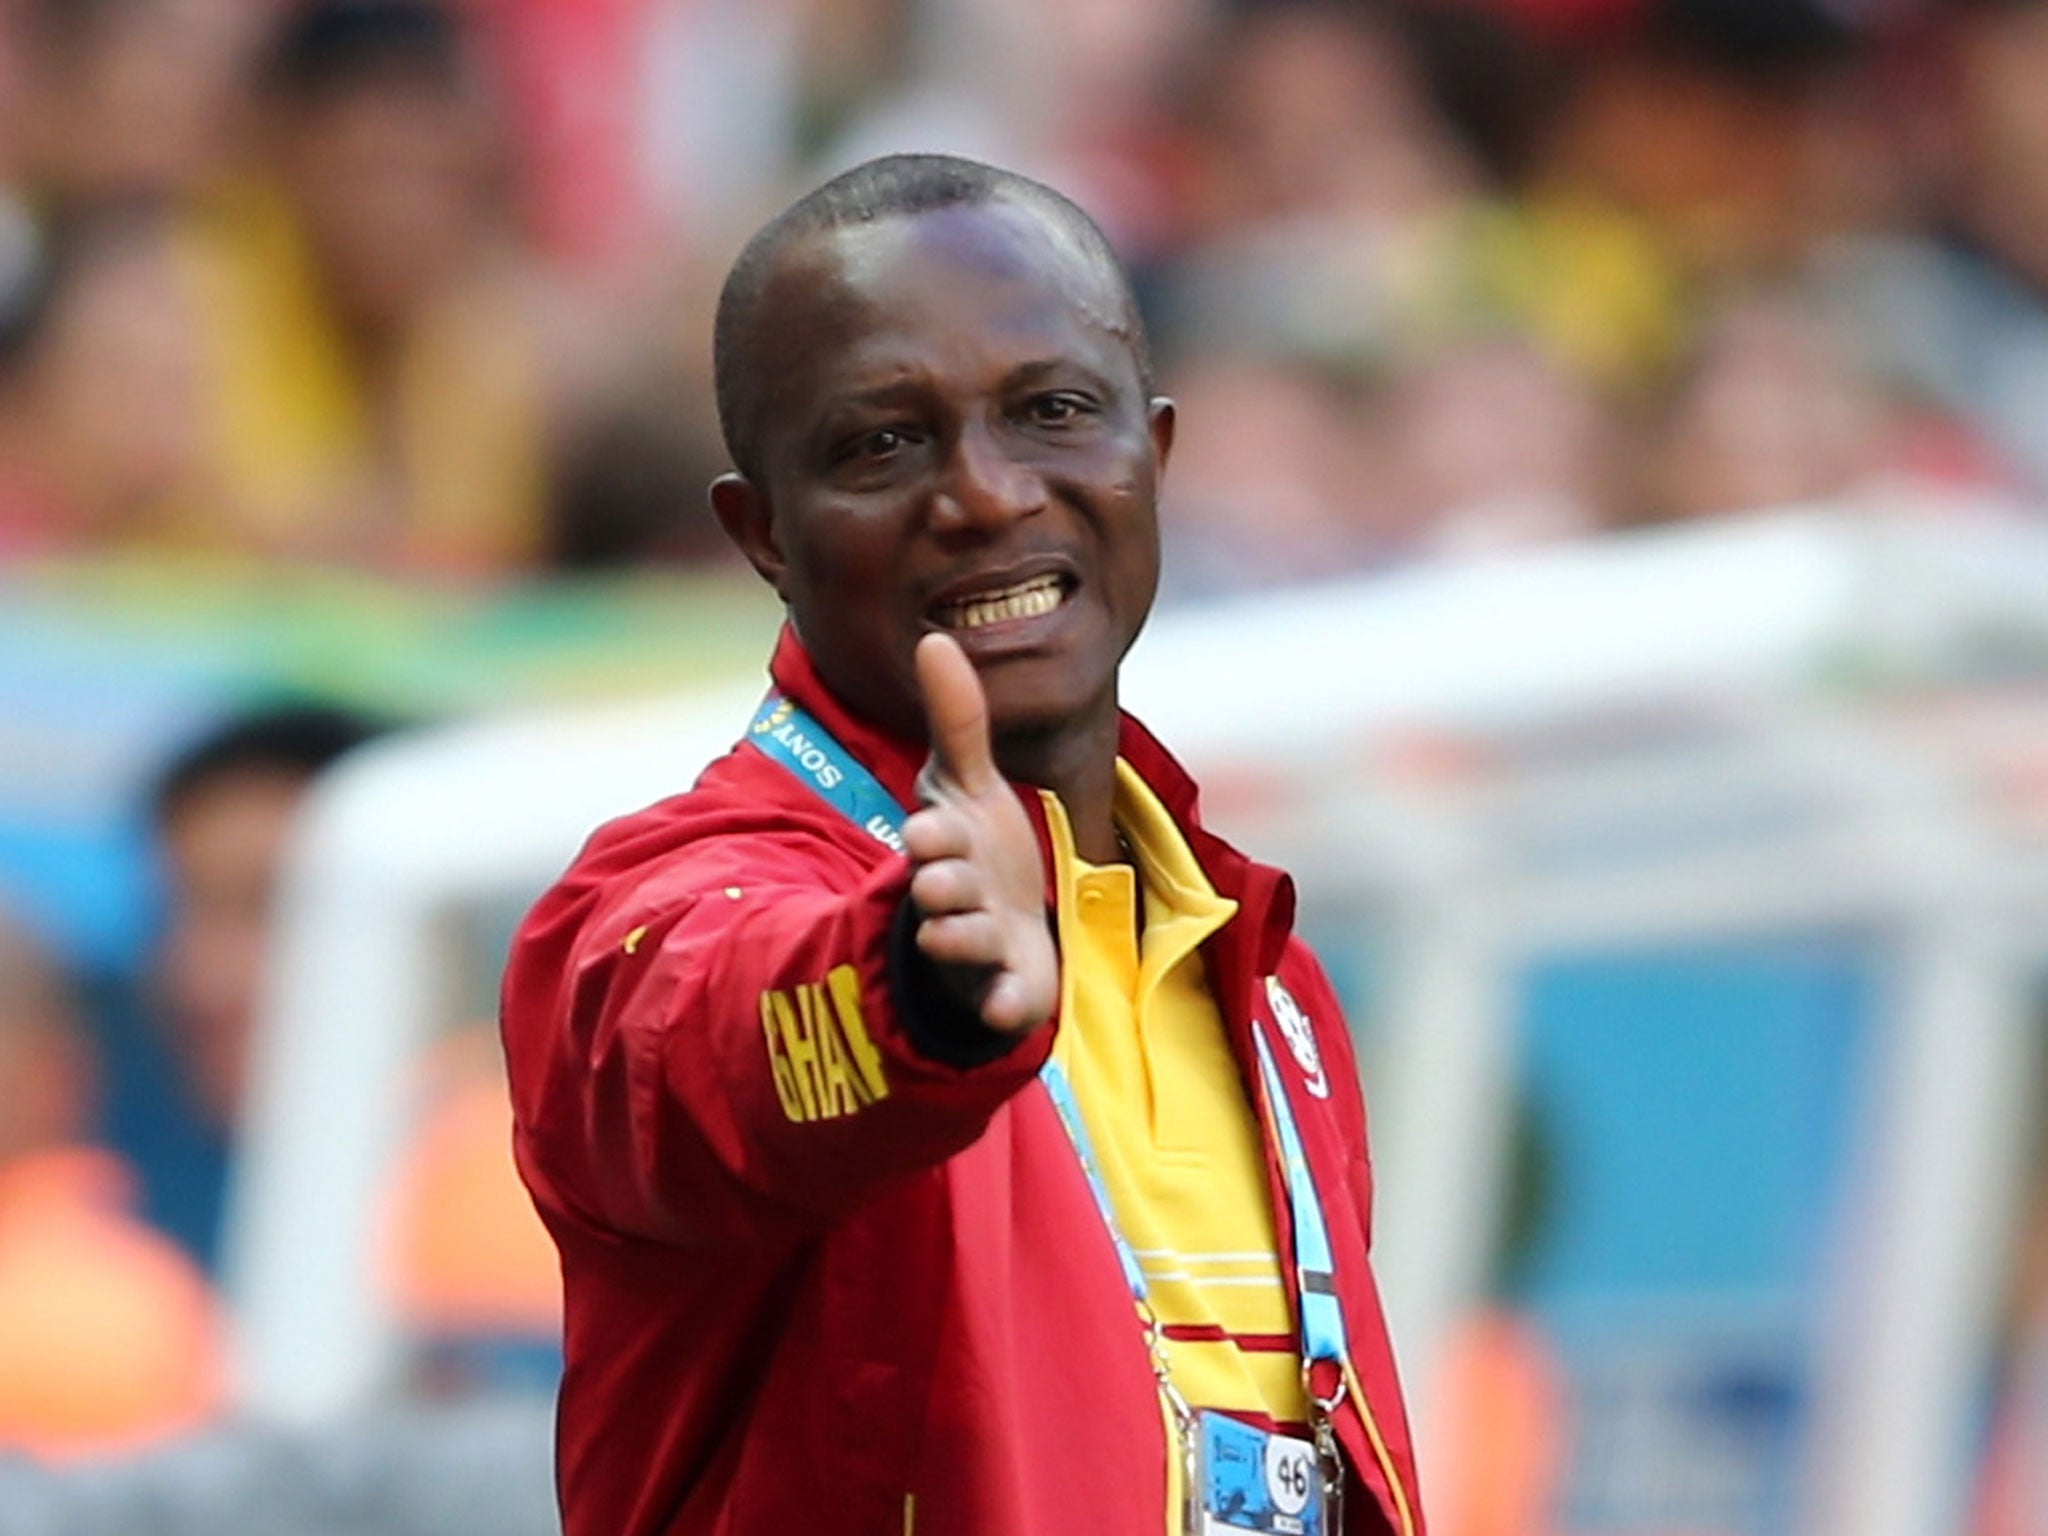 Kwesi Appiah makes a gesture from the touchline in the match against Portugal